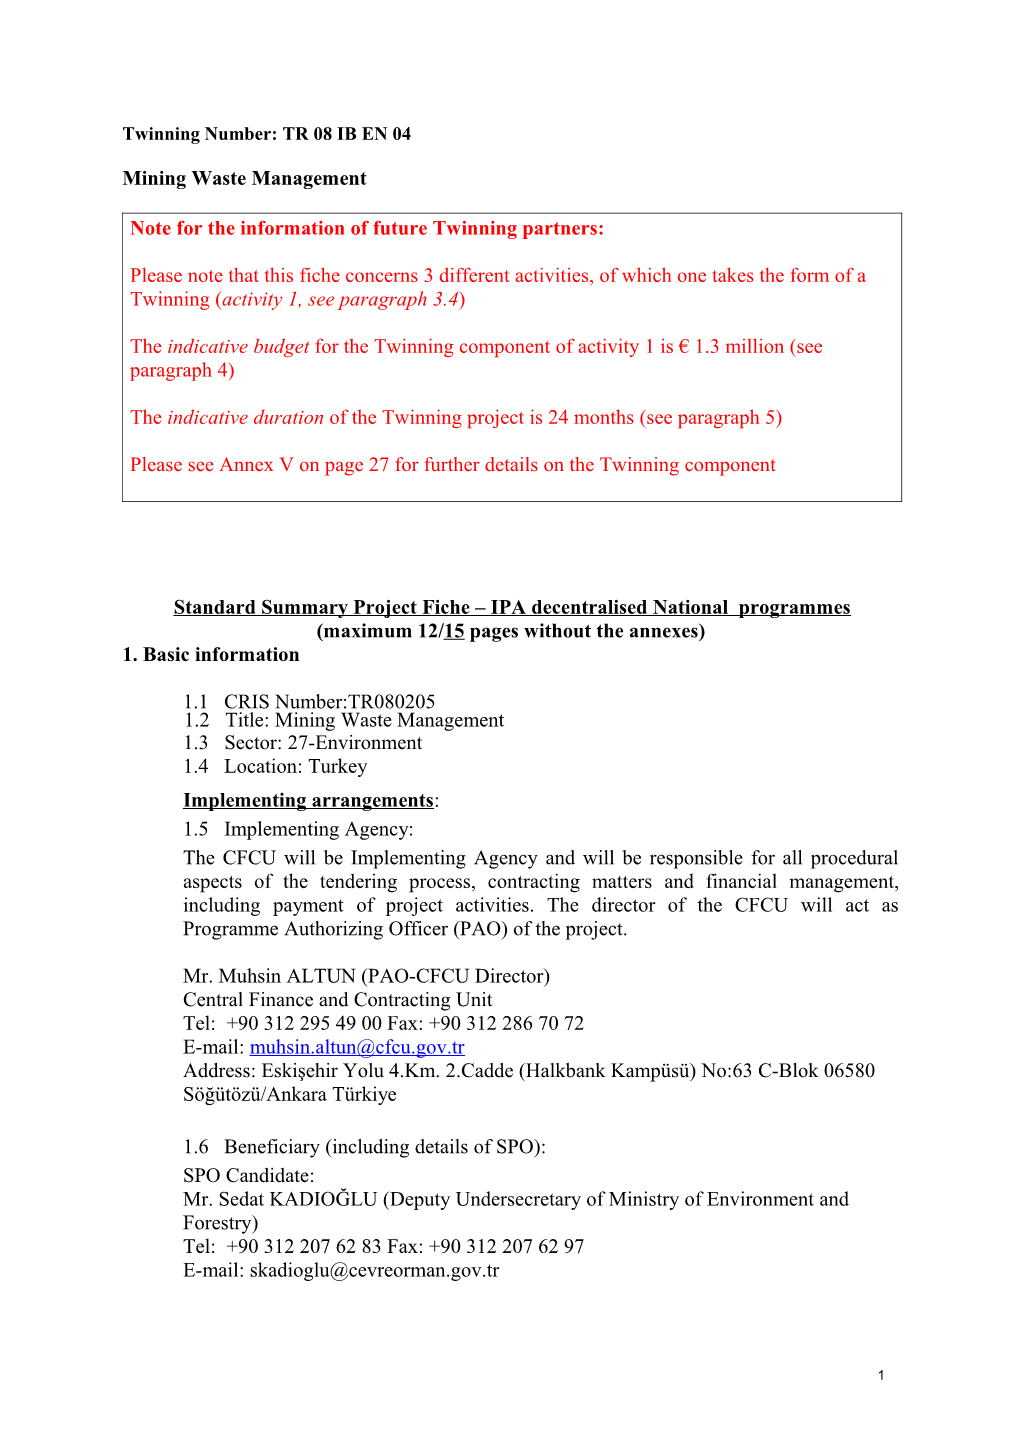 (Annotated) Project Fiche for Phare / Pre-Accession Instrument 2005